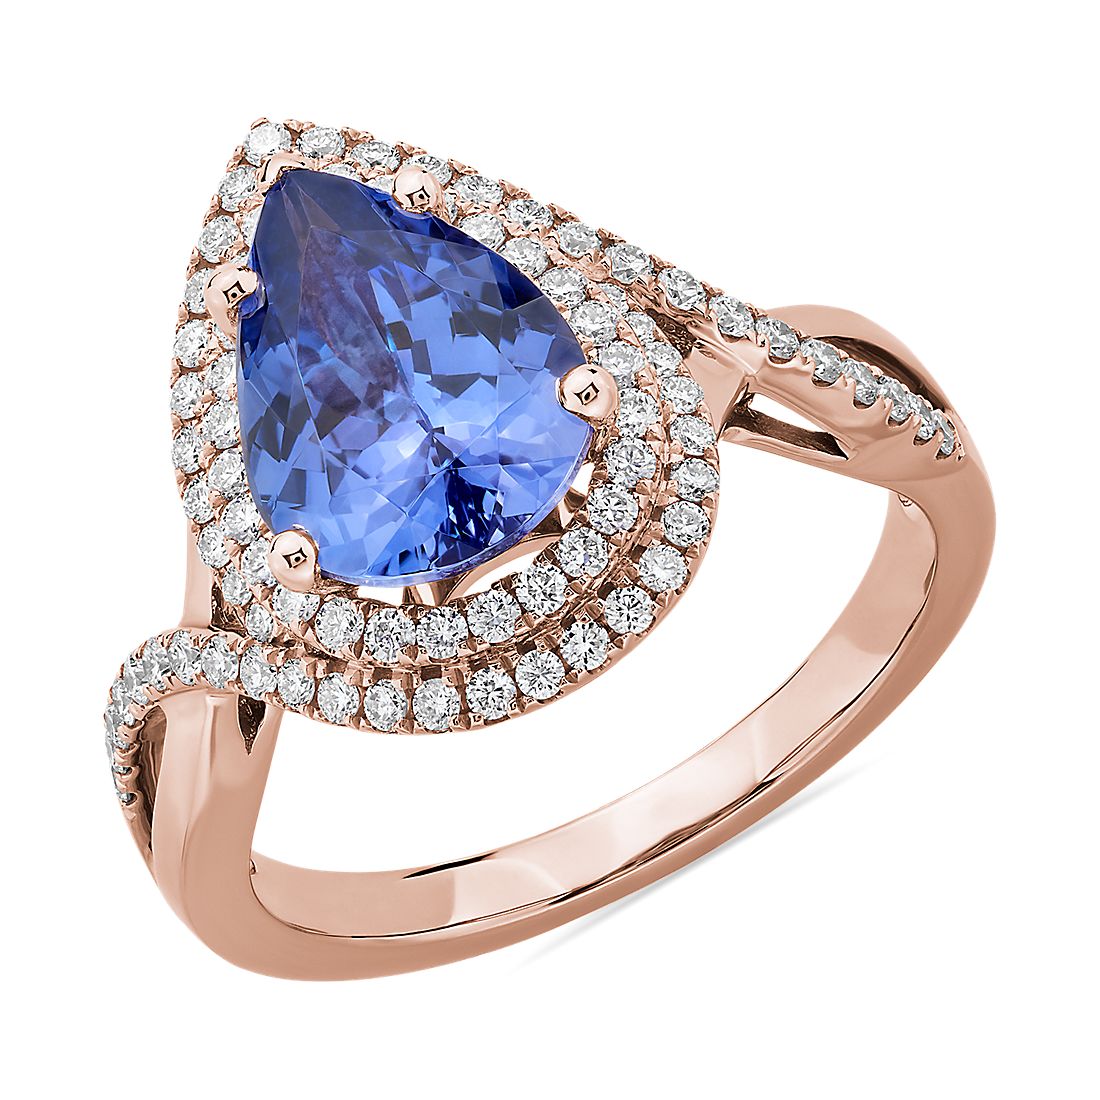 Pear Cut Tanzanite Ring with Double Diamond Halo in 14k Rose Gold